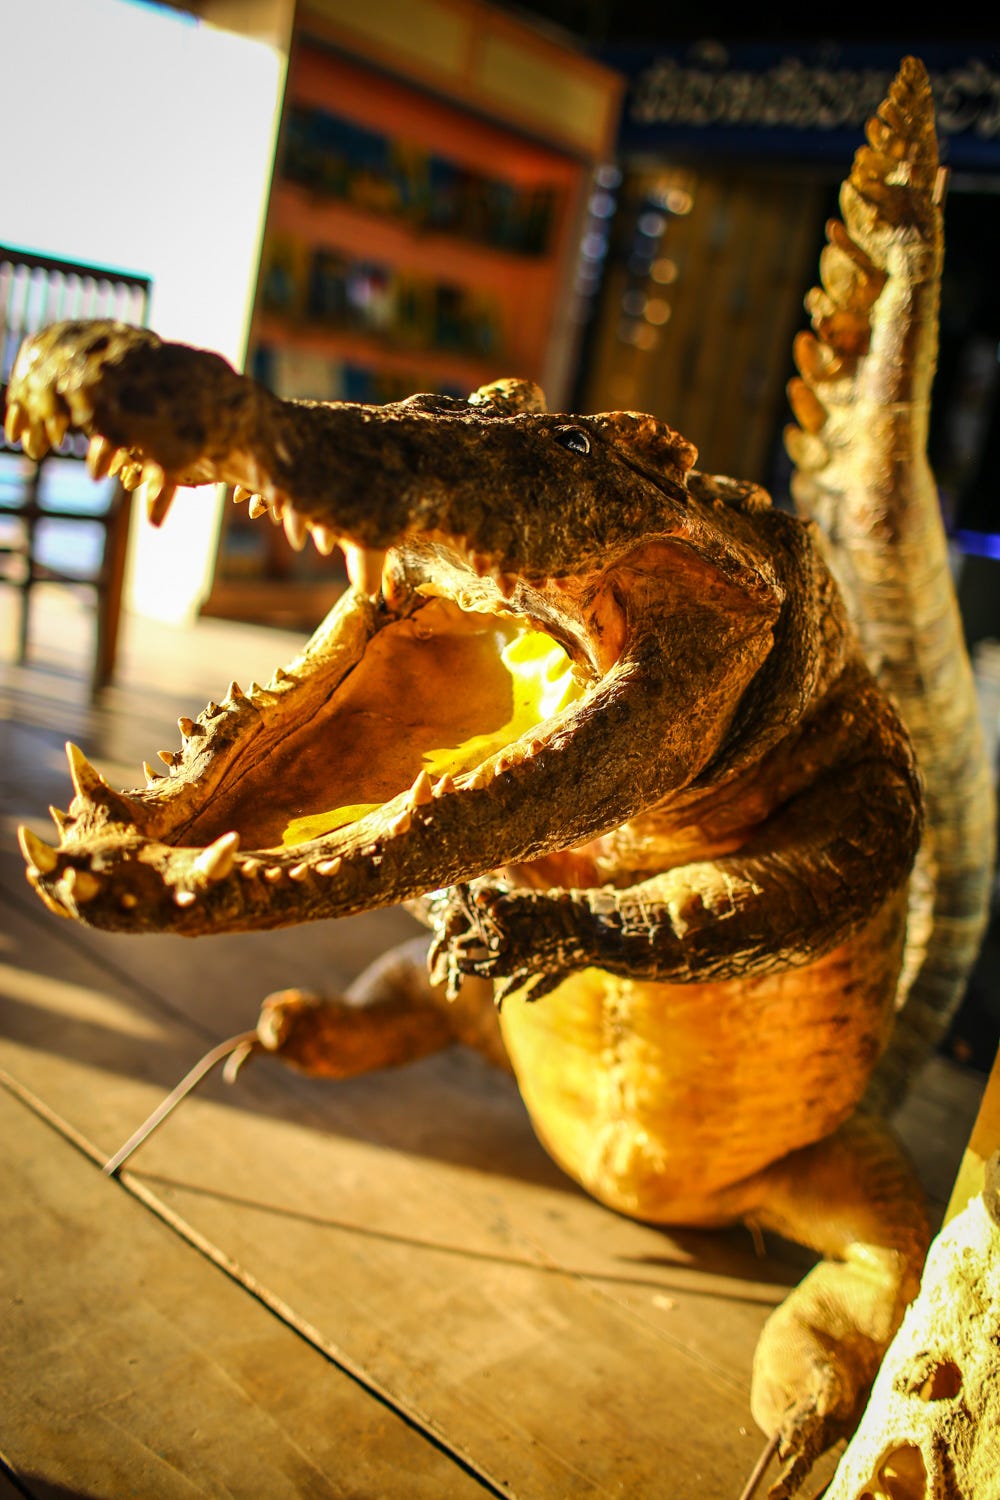 A photo of a stuffed crocodile, posed to be standing on its hind legs with it's jag gaping, rows or ragged teeth in full display.